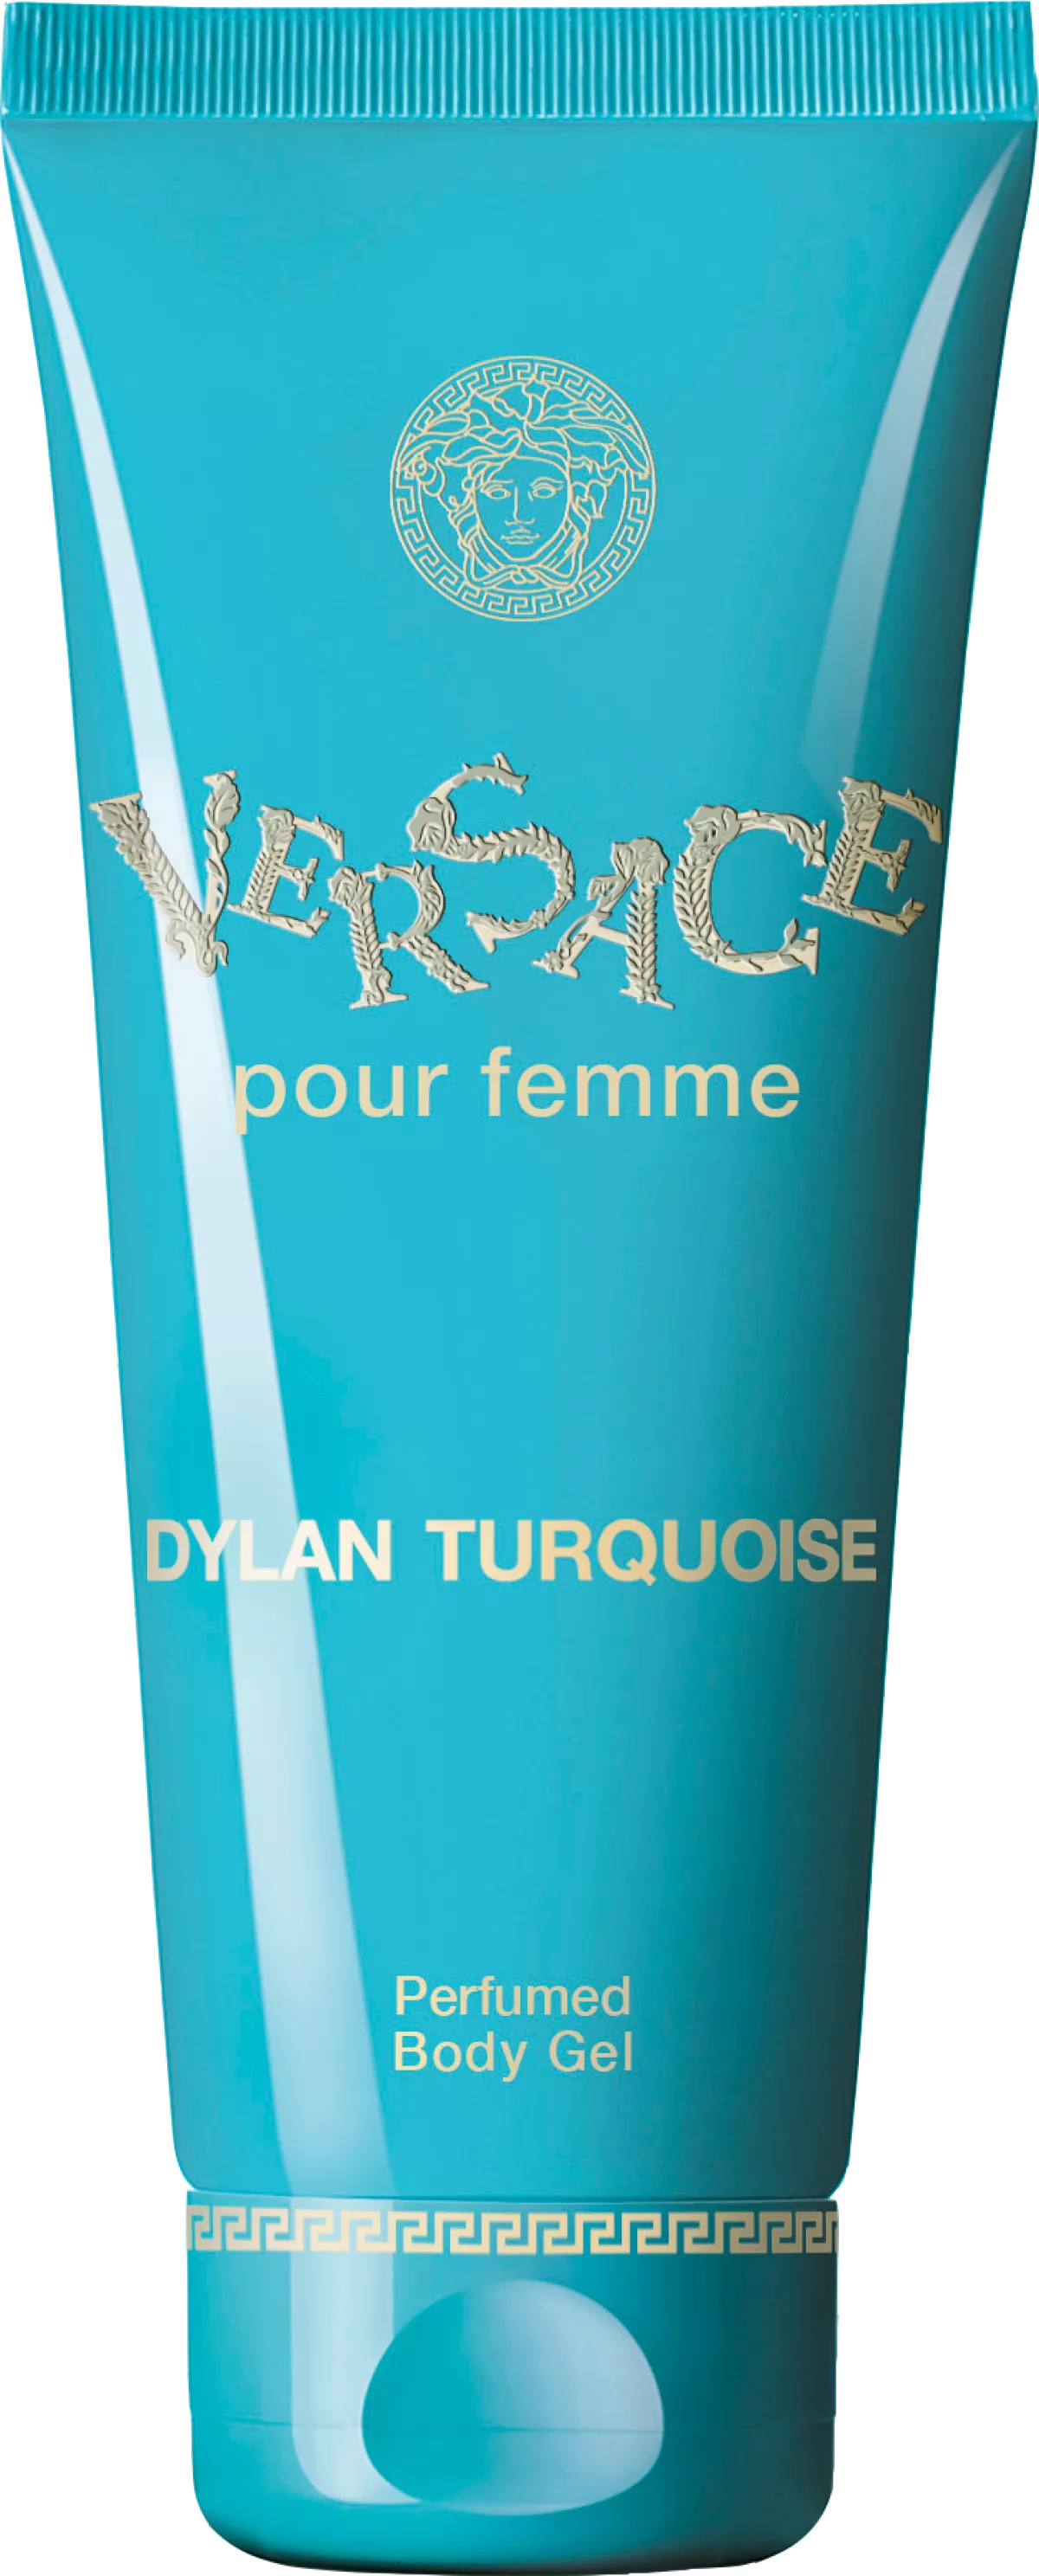 200 Versace Pour Body - Femme Dylan Turquoise ml Gel